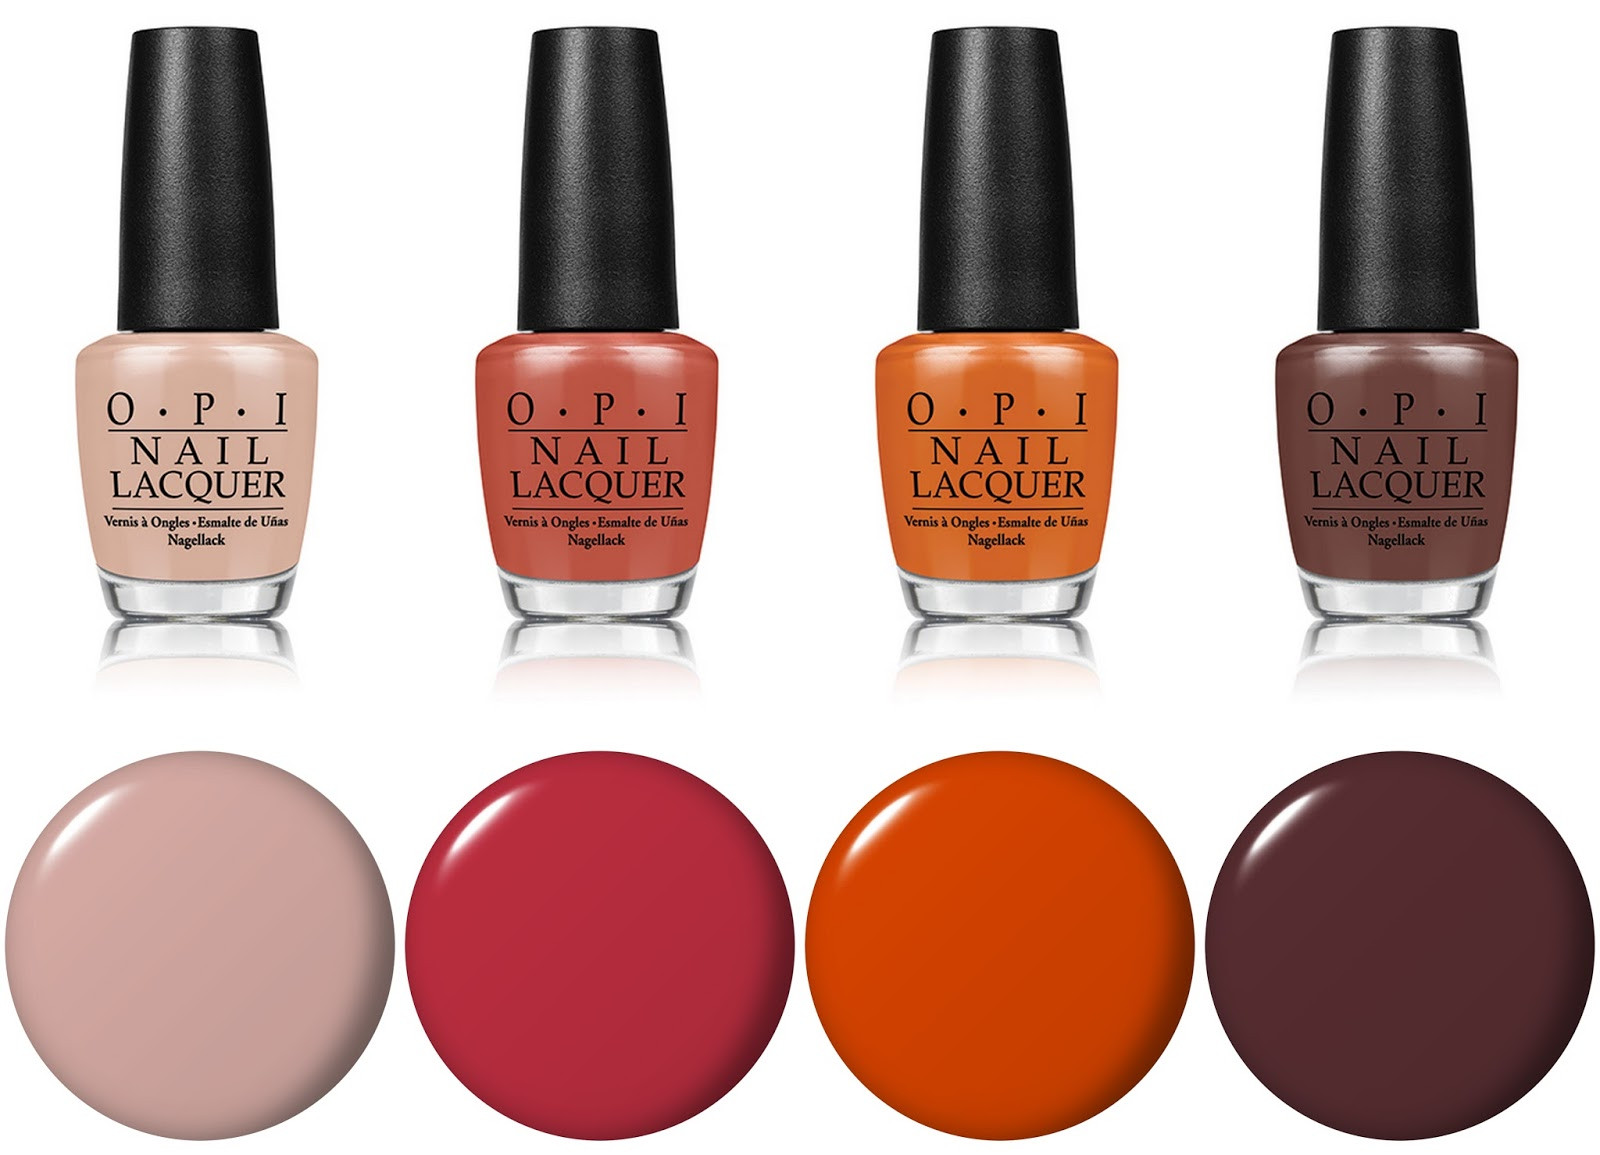 OPI Fall Nail Color Collection - wide 9